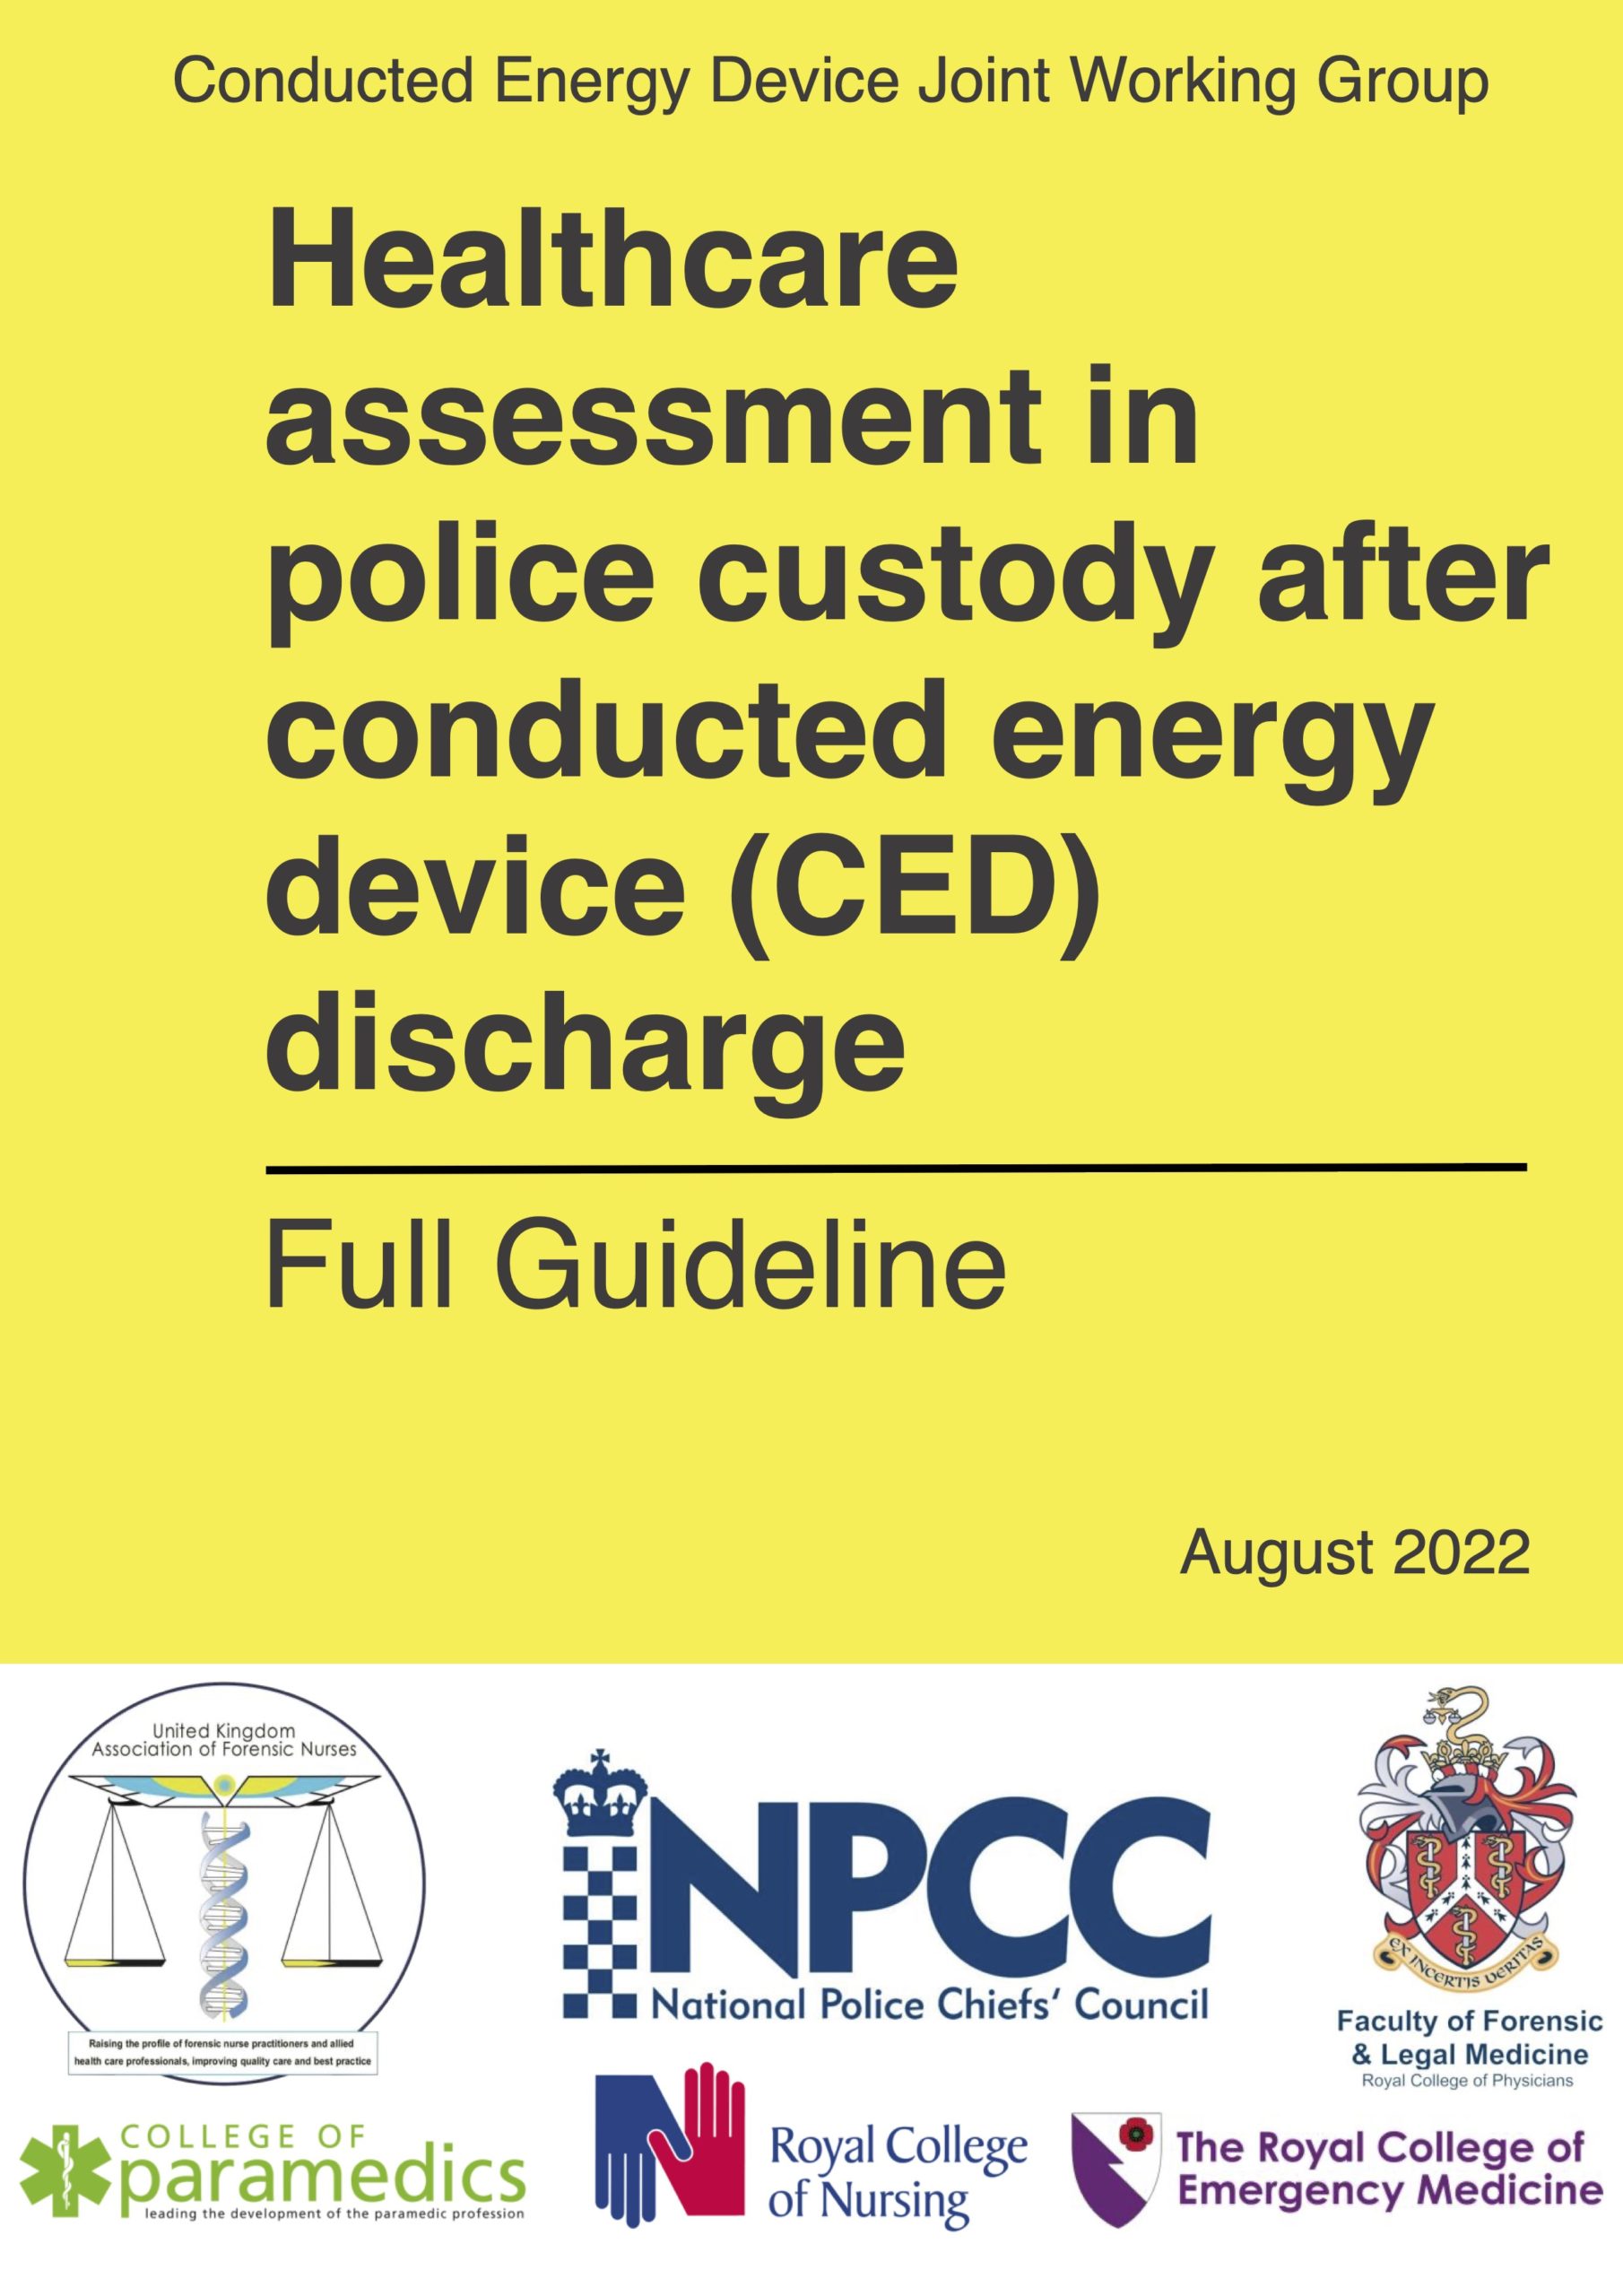 Healthcare assessment in police custody after conducted energy device (CED) discharge (Aug 2022)